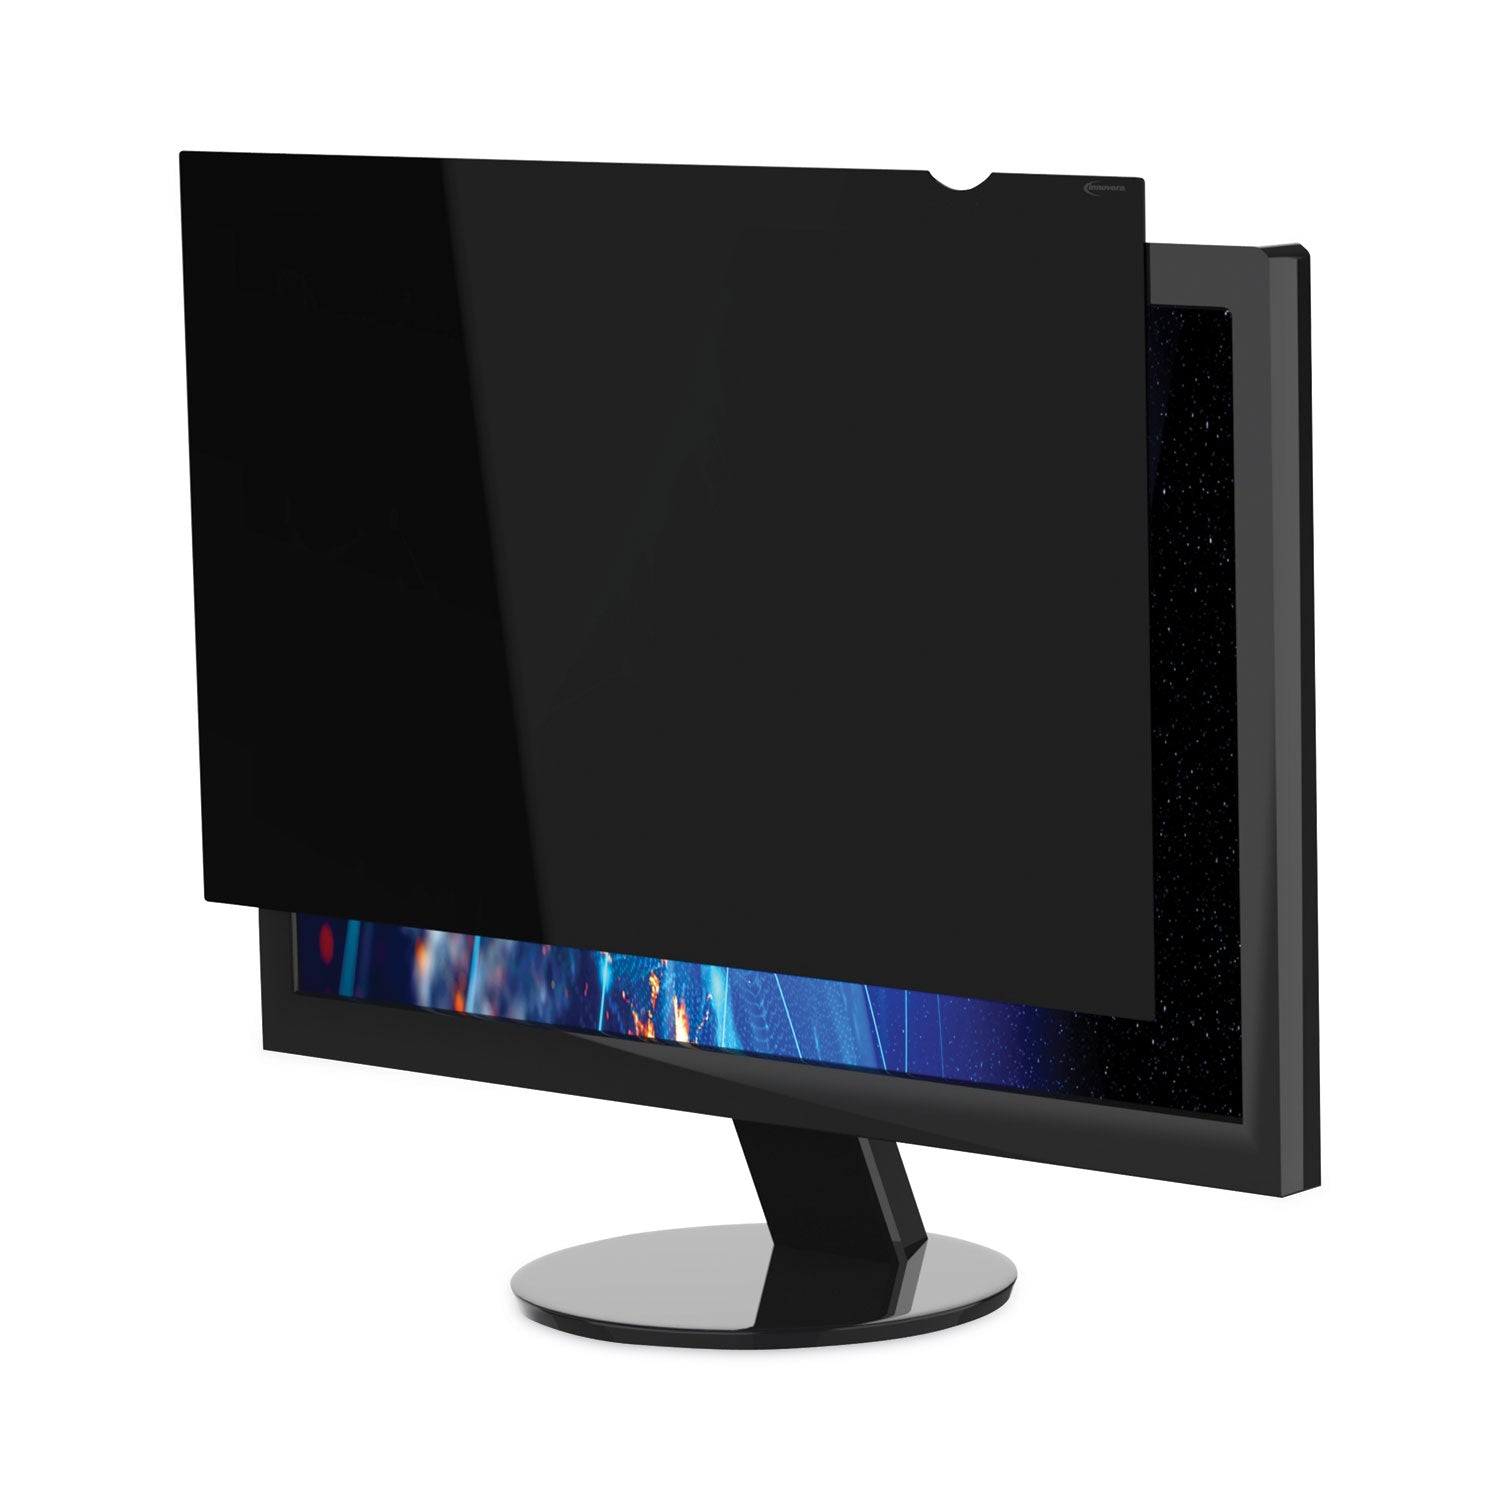 blackout-privacy-monitor-filter-for-201-widescreen-flat-panel-monitor-1610-aspect-ratio_ivrblf201w - 3